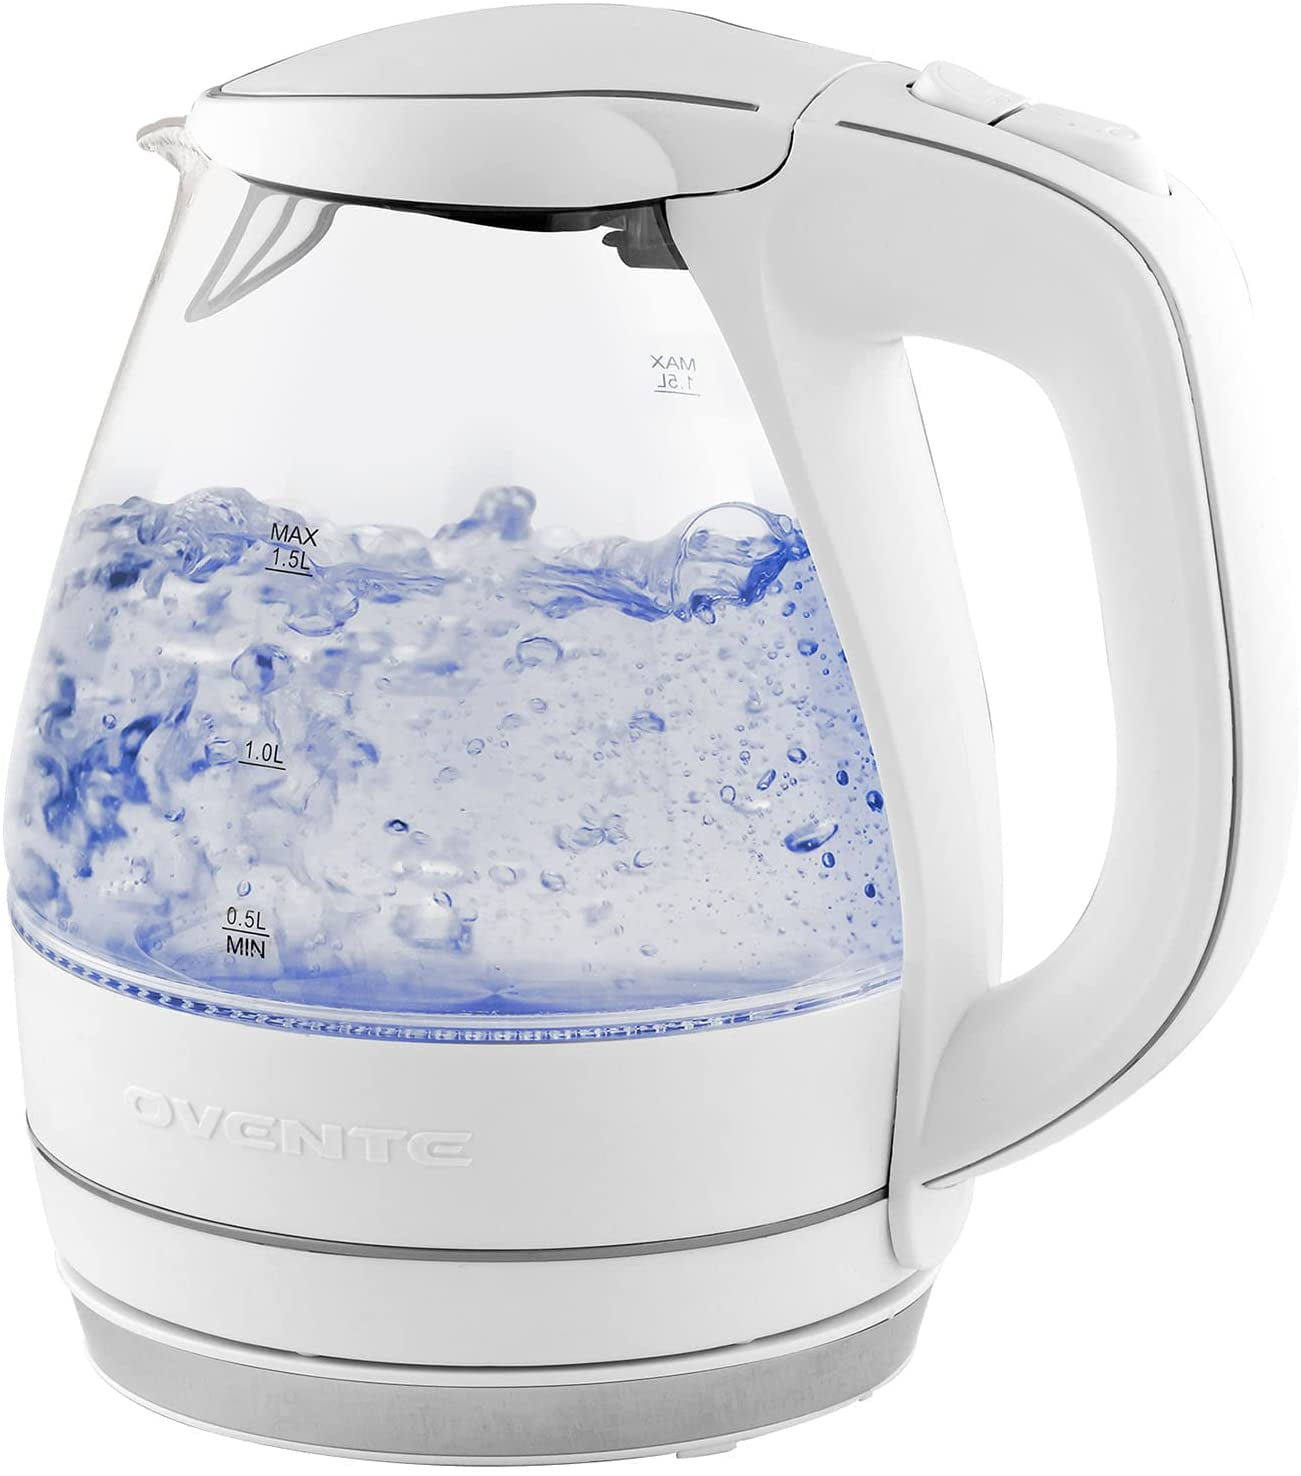 Ovente Electric Glass Kettle - 1.5 Liters - White